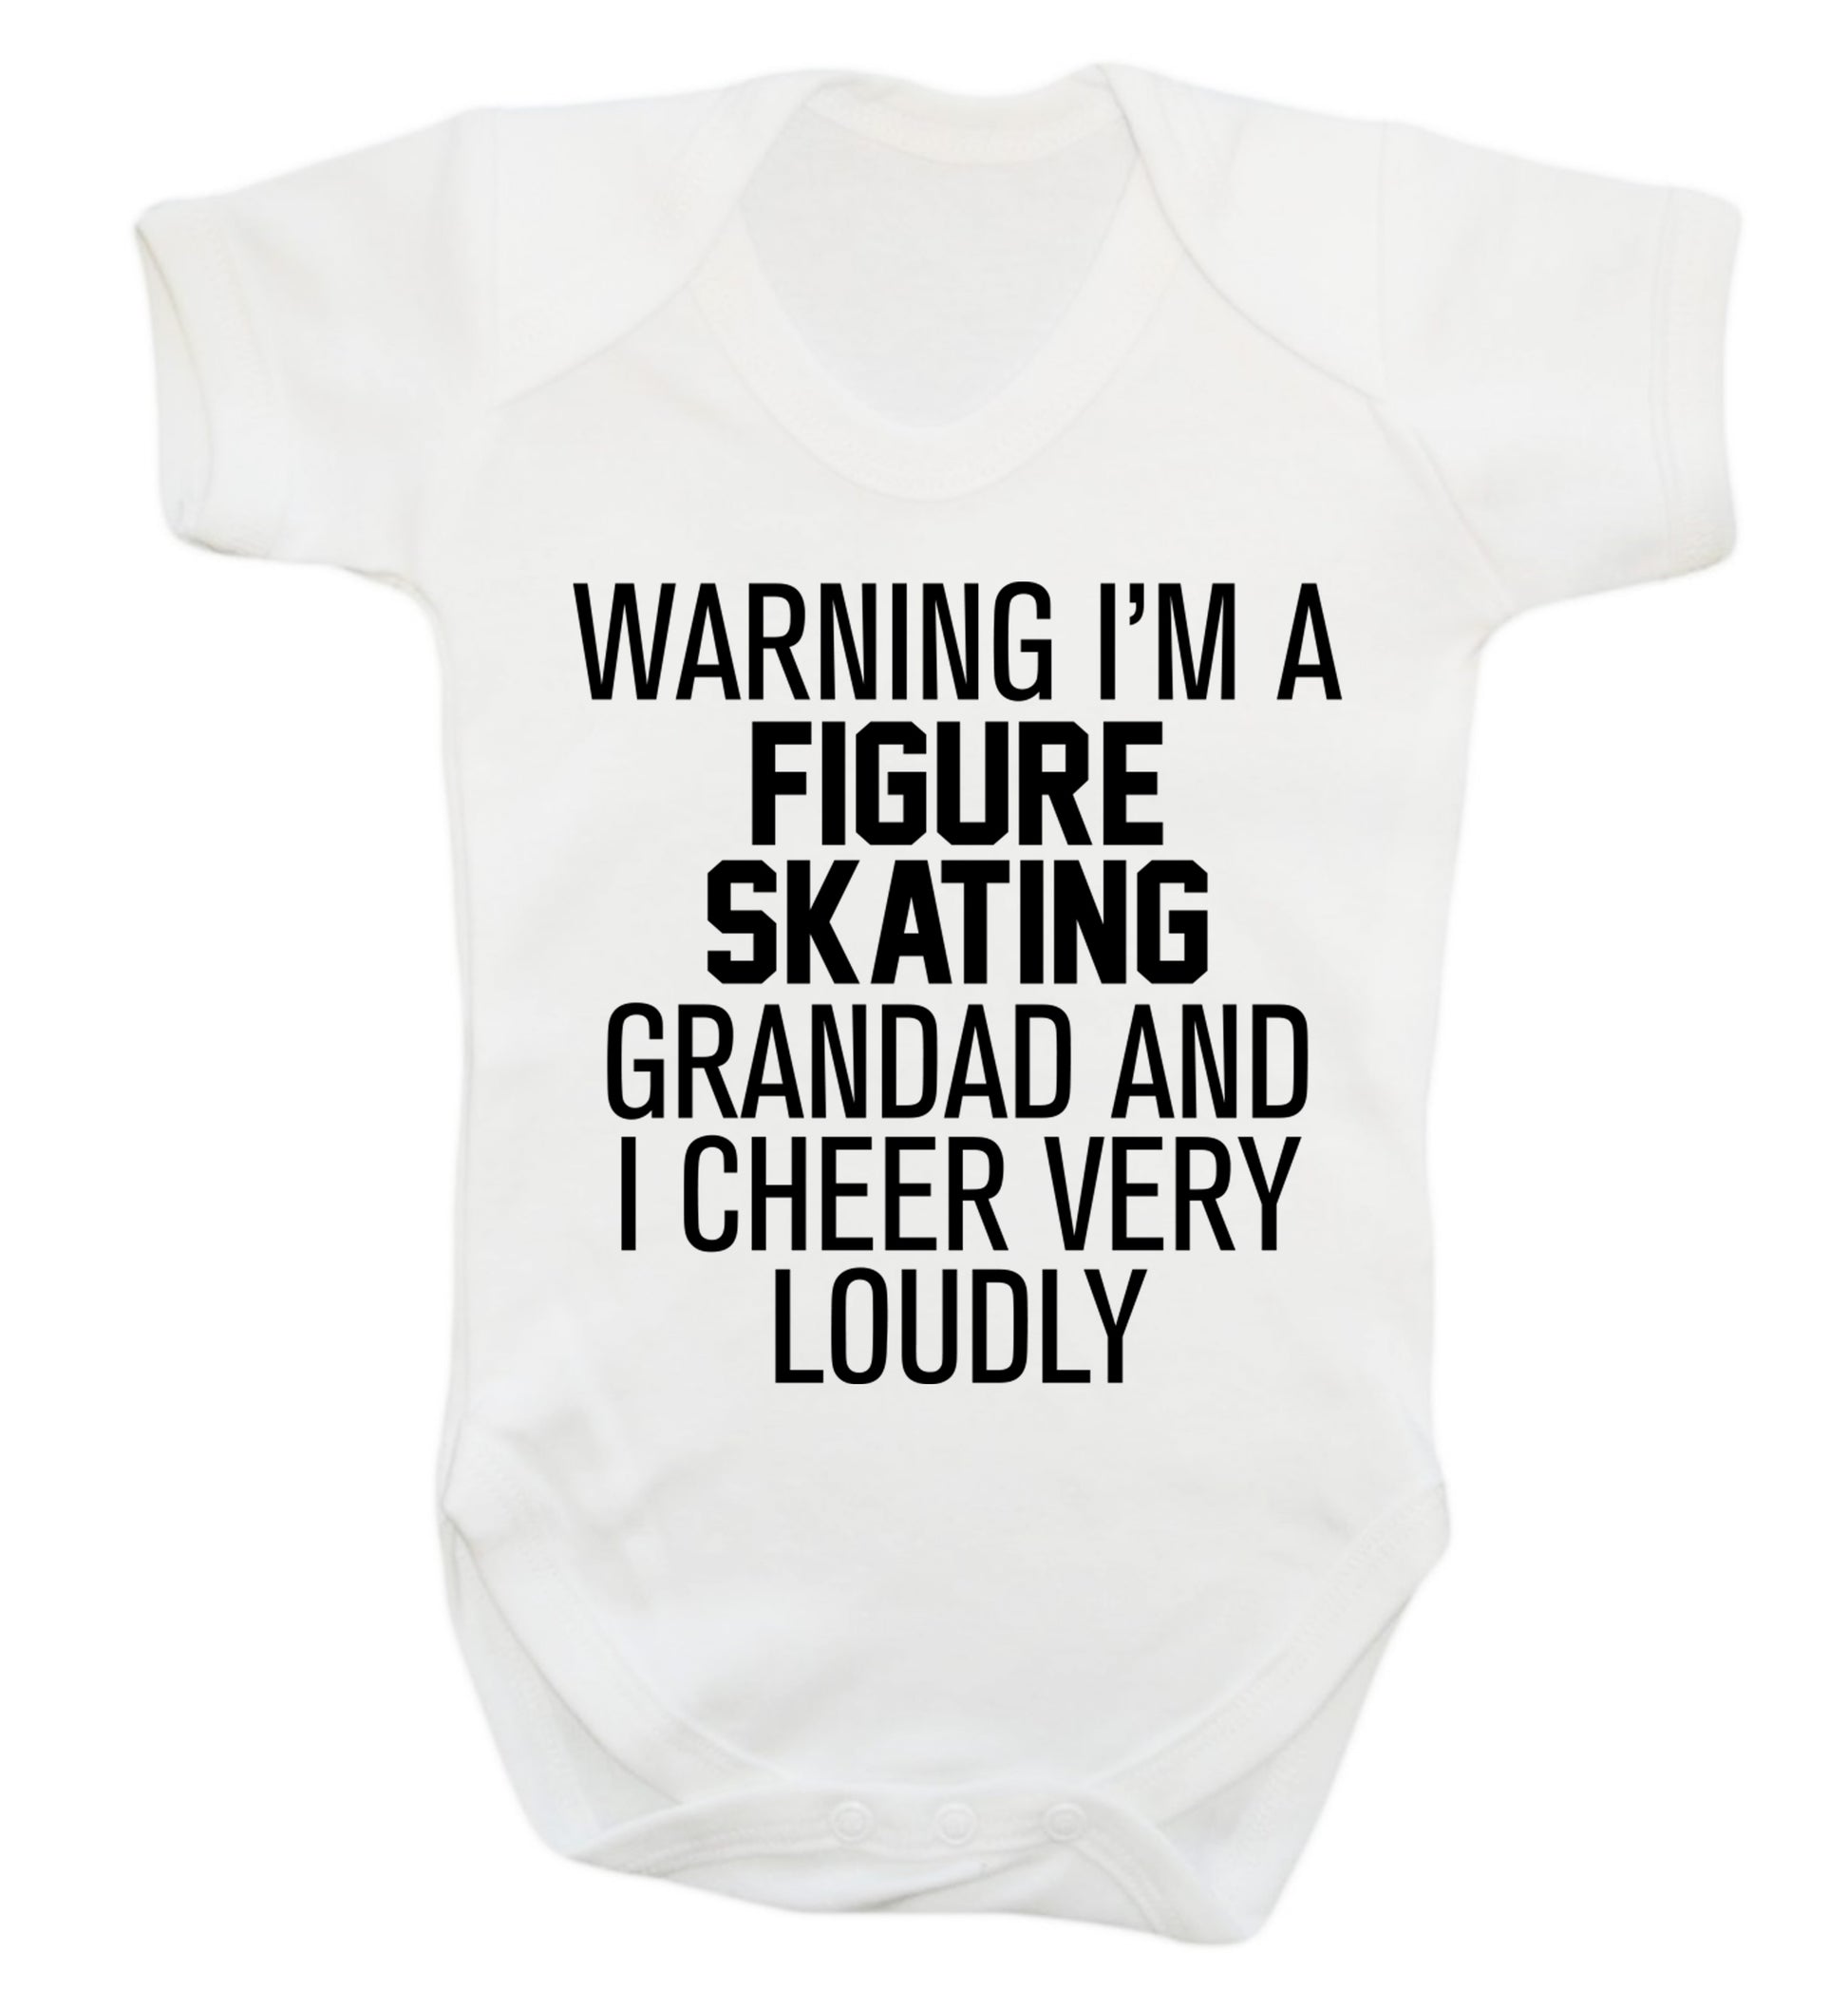 Warning I'm a figure skating grandad and I cheer very loudly Baby Vest white 18-24 months